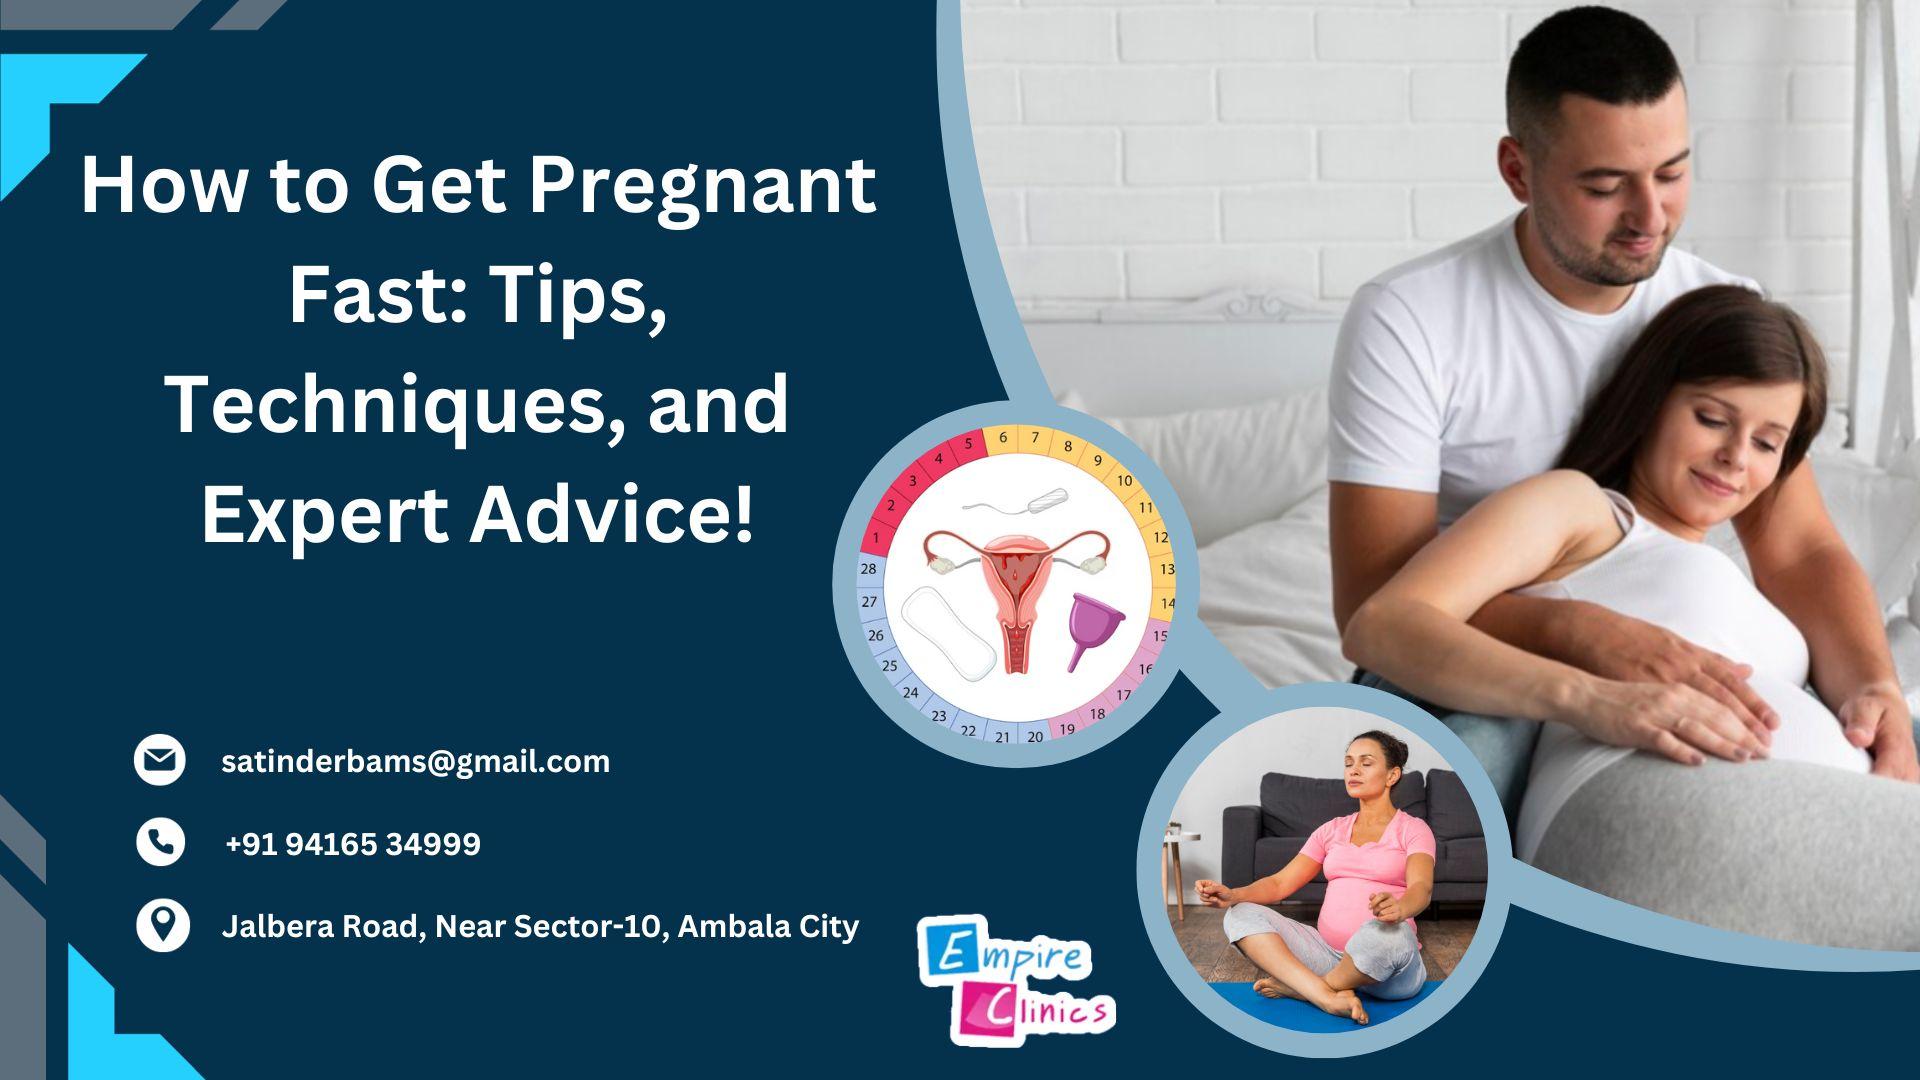 How to Get Pregnant Fast: Tips, Techniques, and Expert Advice!